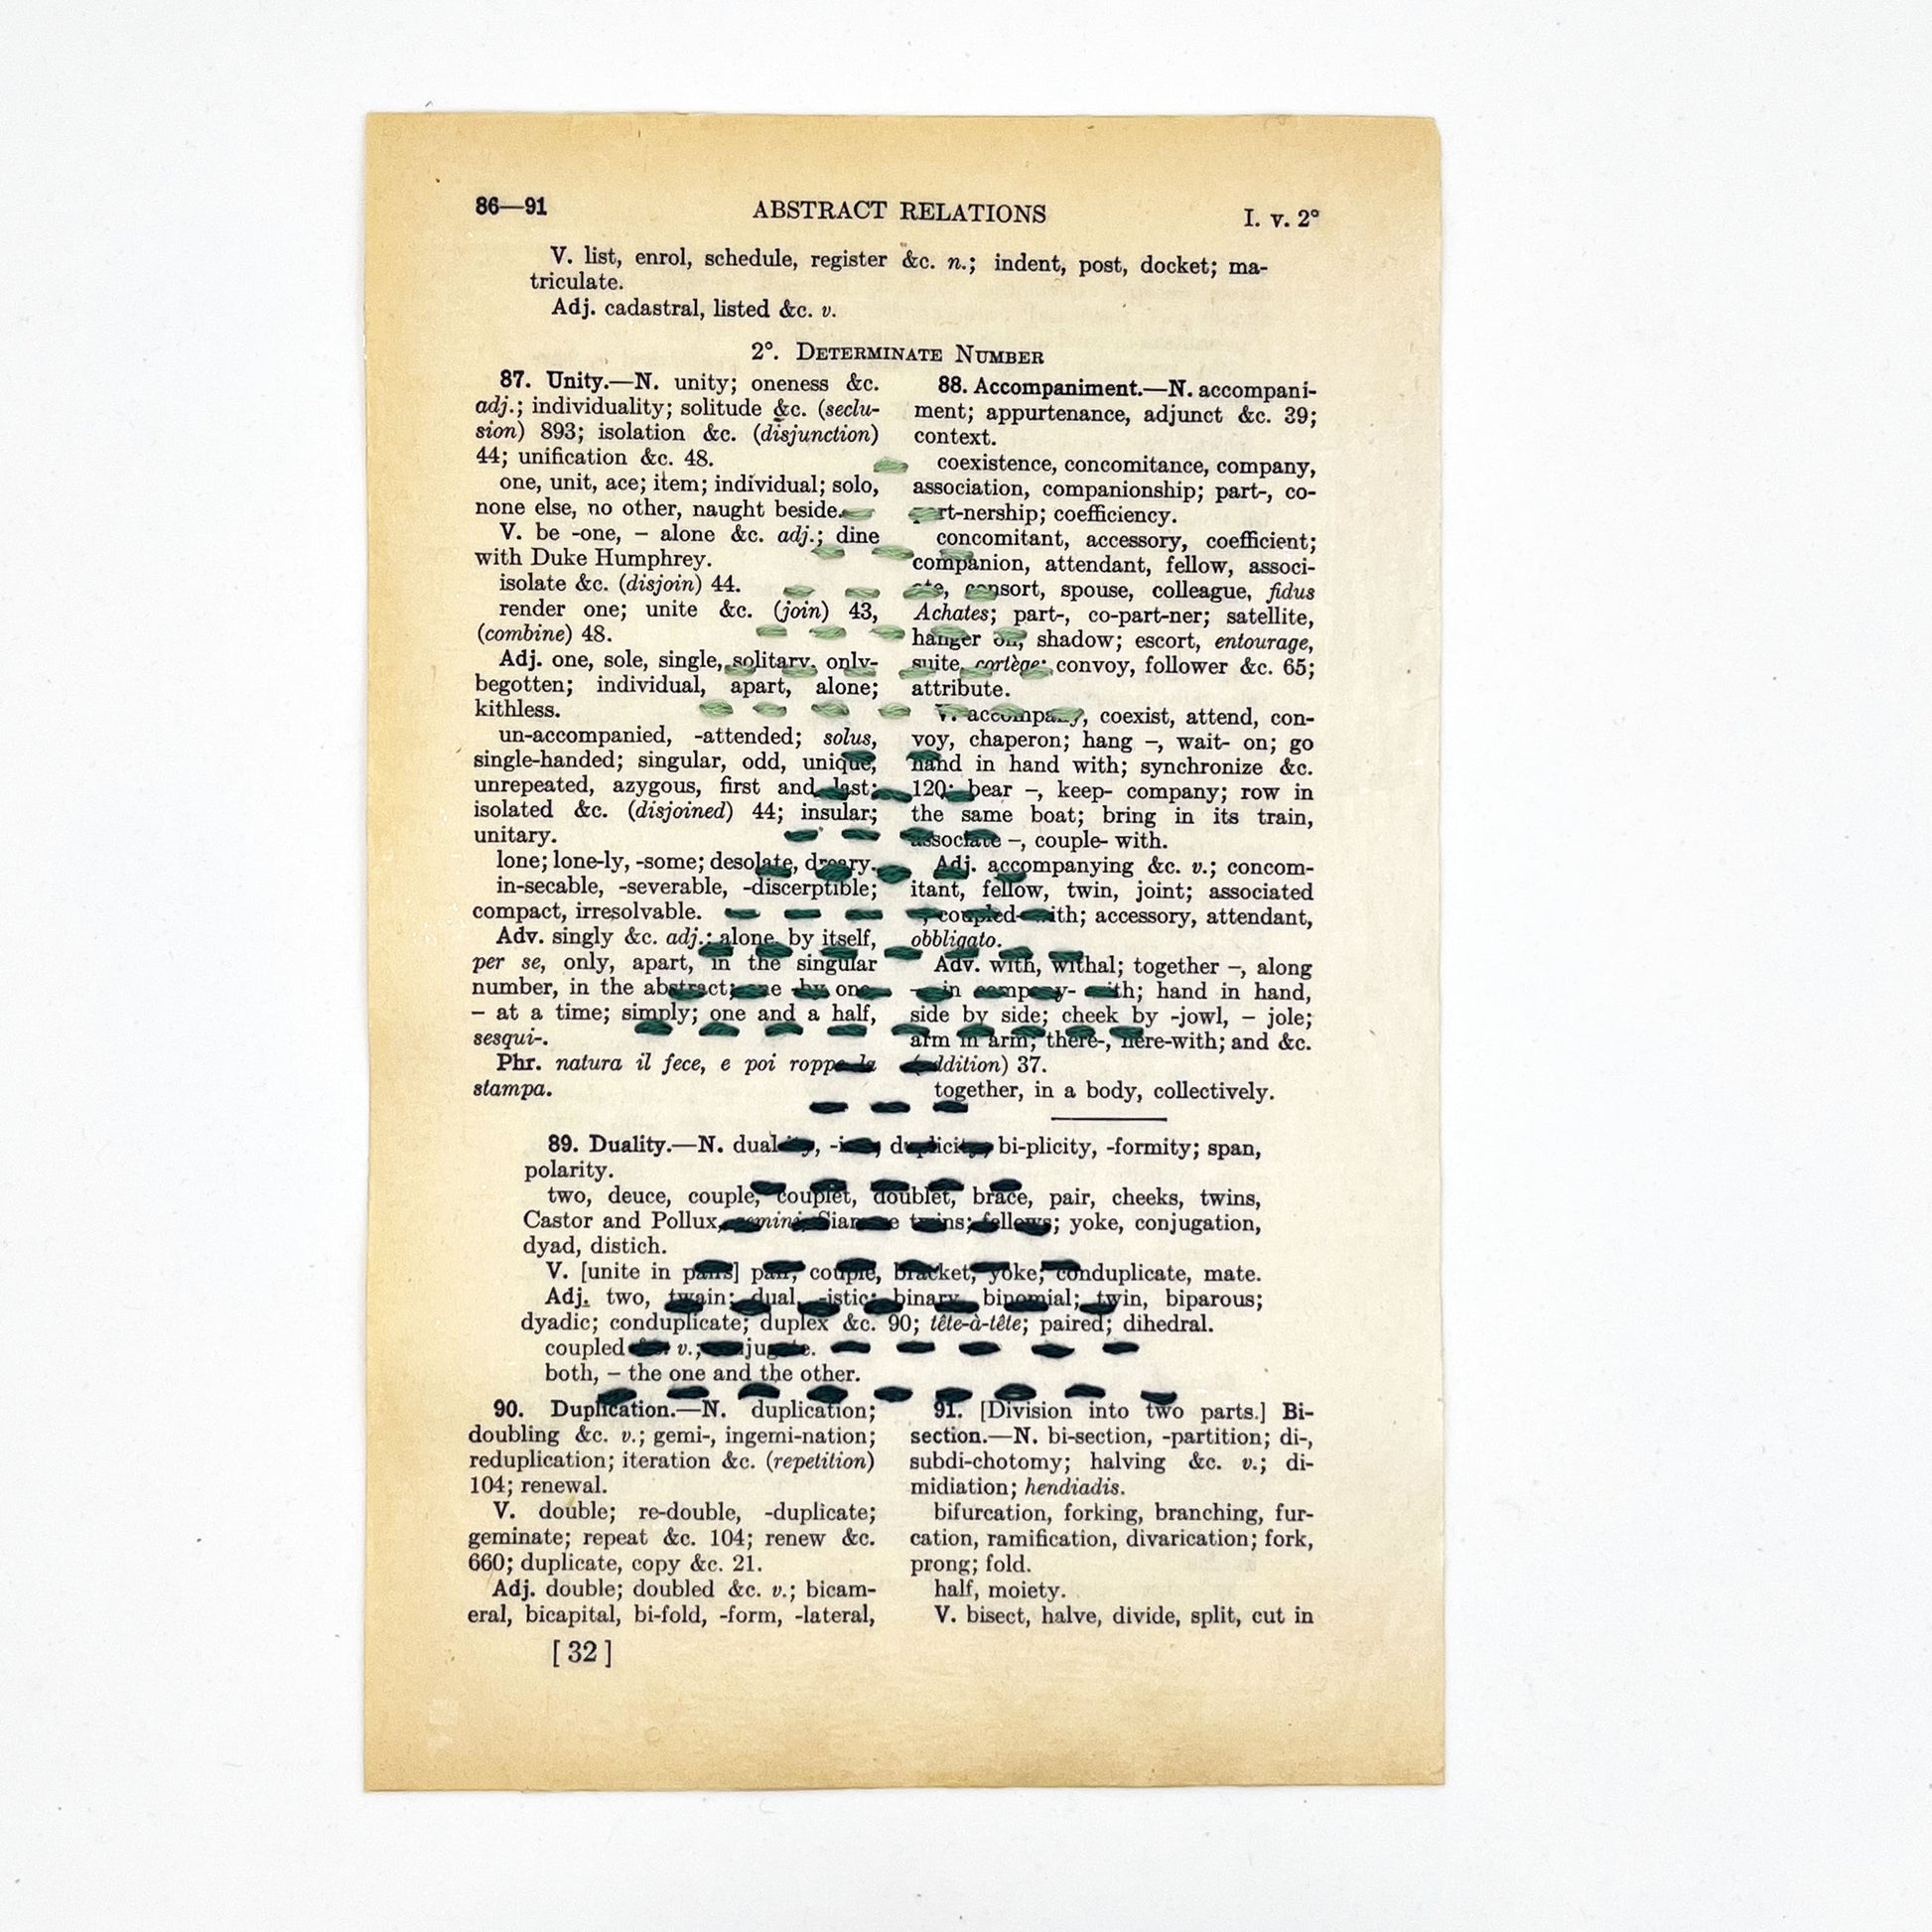 a vintage thesaurus page, embroidered with the shape of a Christmas tree made from running stitches in shades of pine green thread, grouped in three triangles to form the tree shape, on a white background